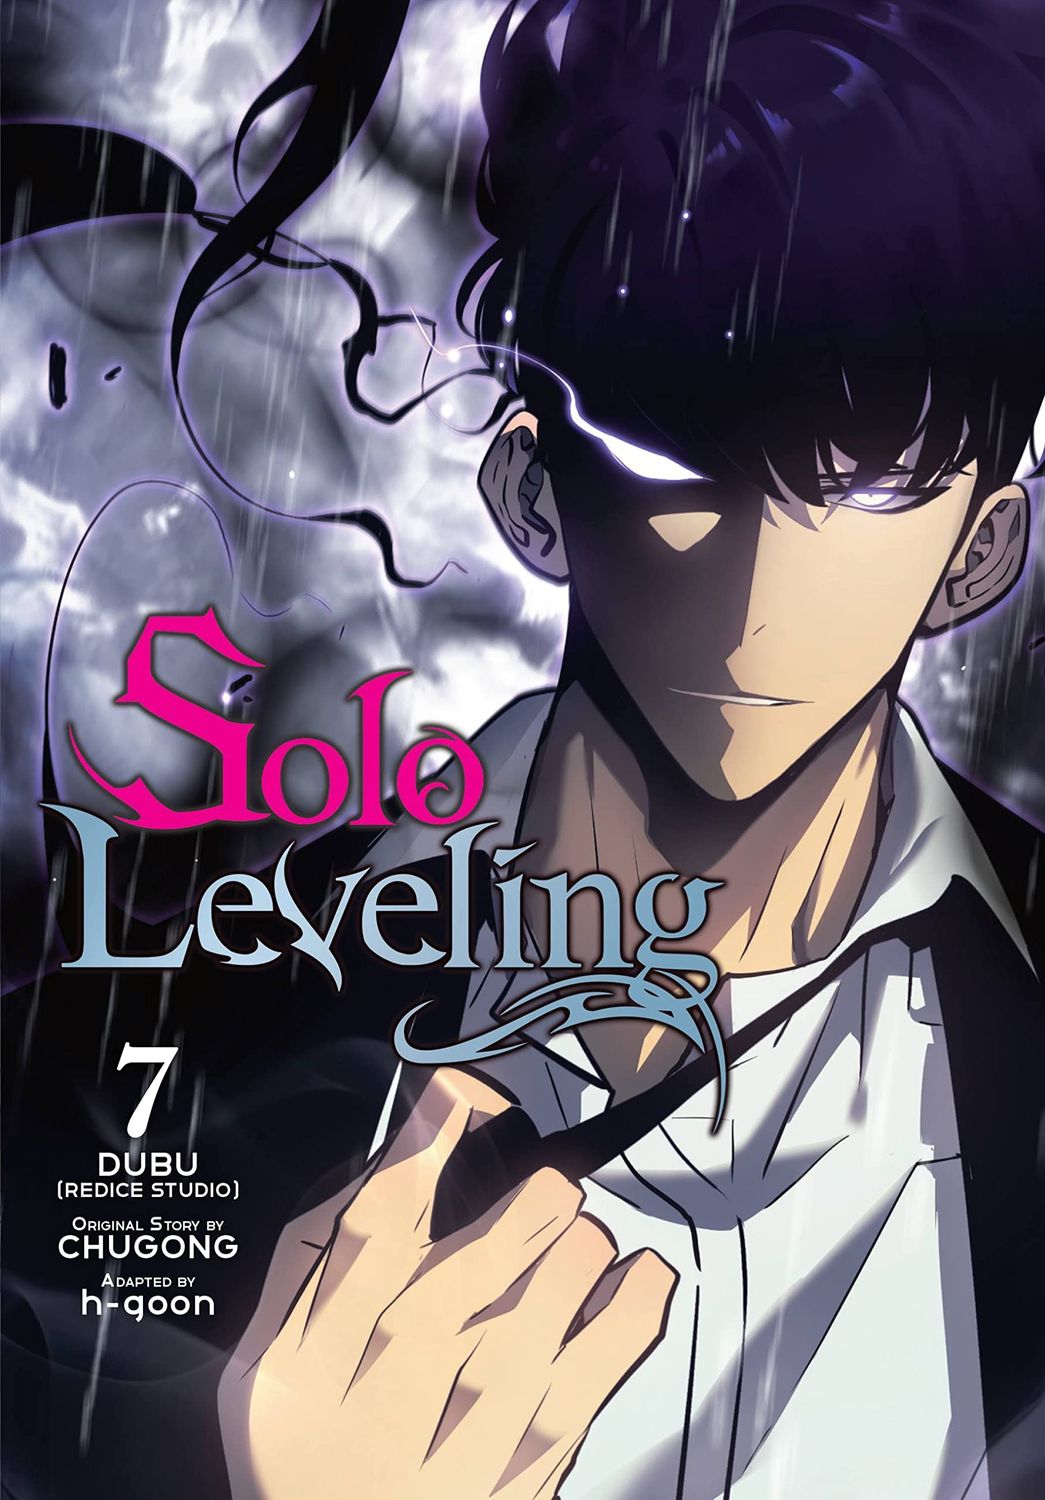 Solo Leveling, Tome 12 (Solo Leveling #12) by Chugong